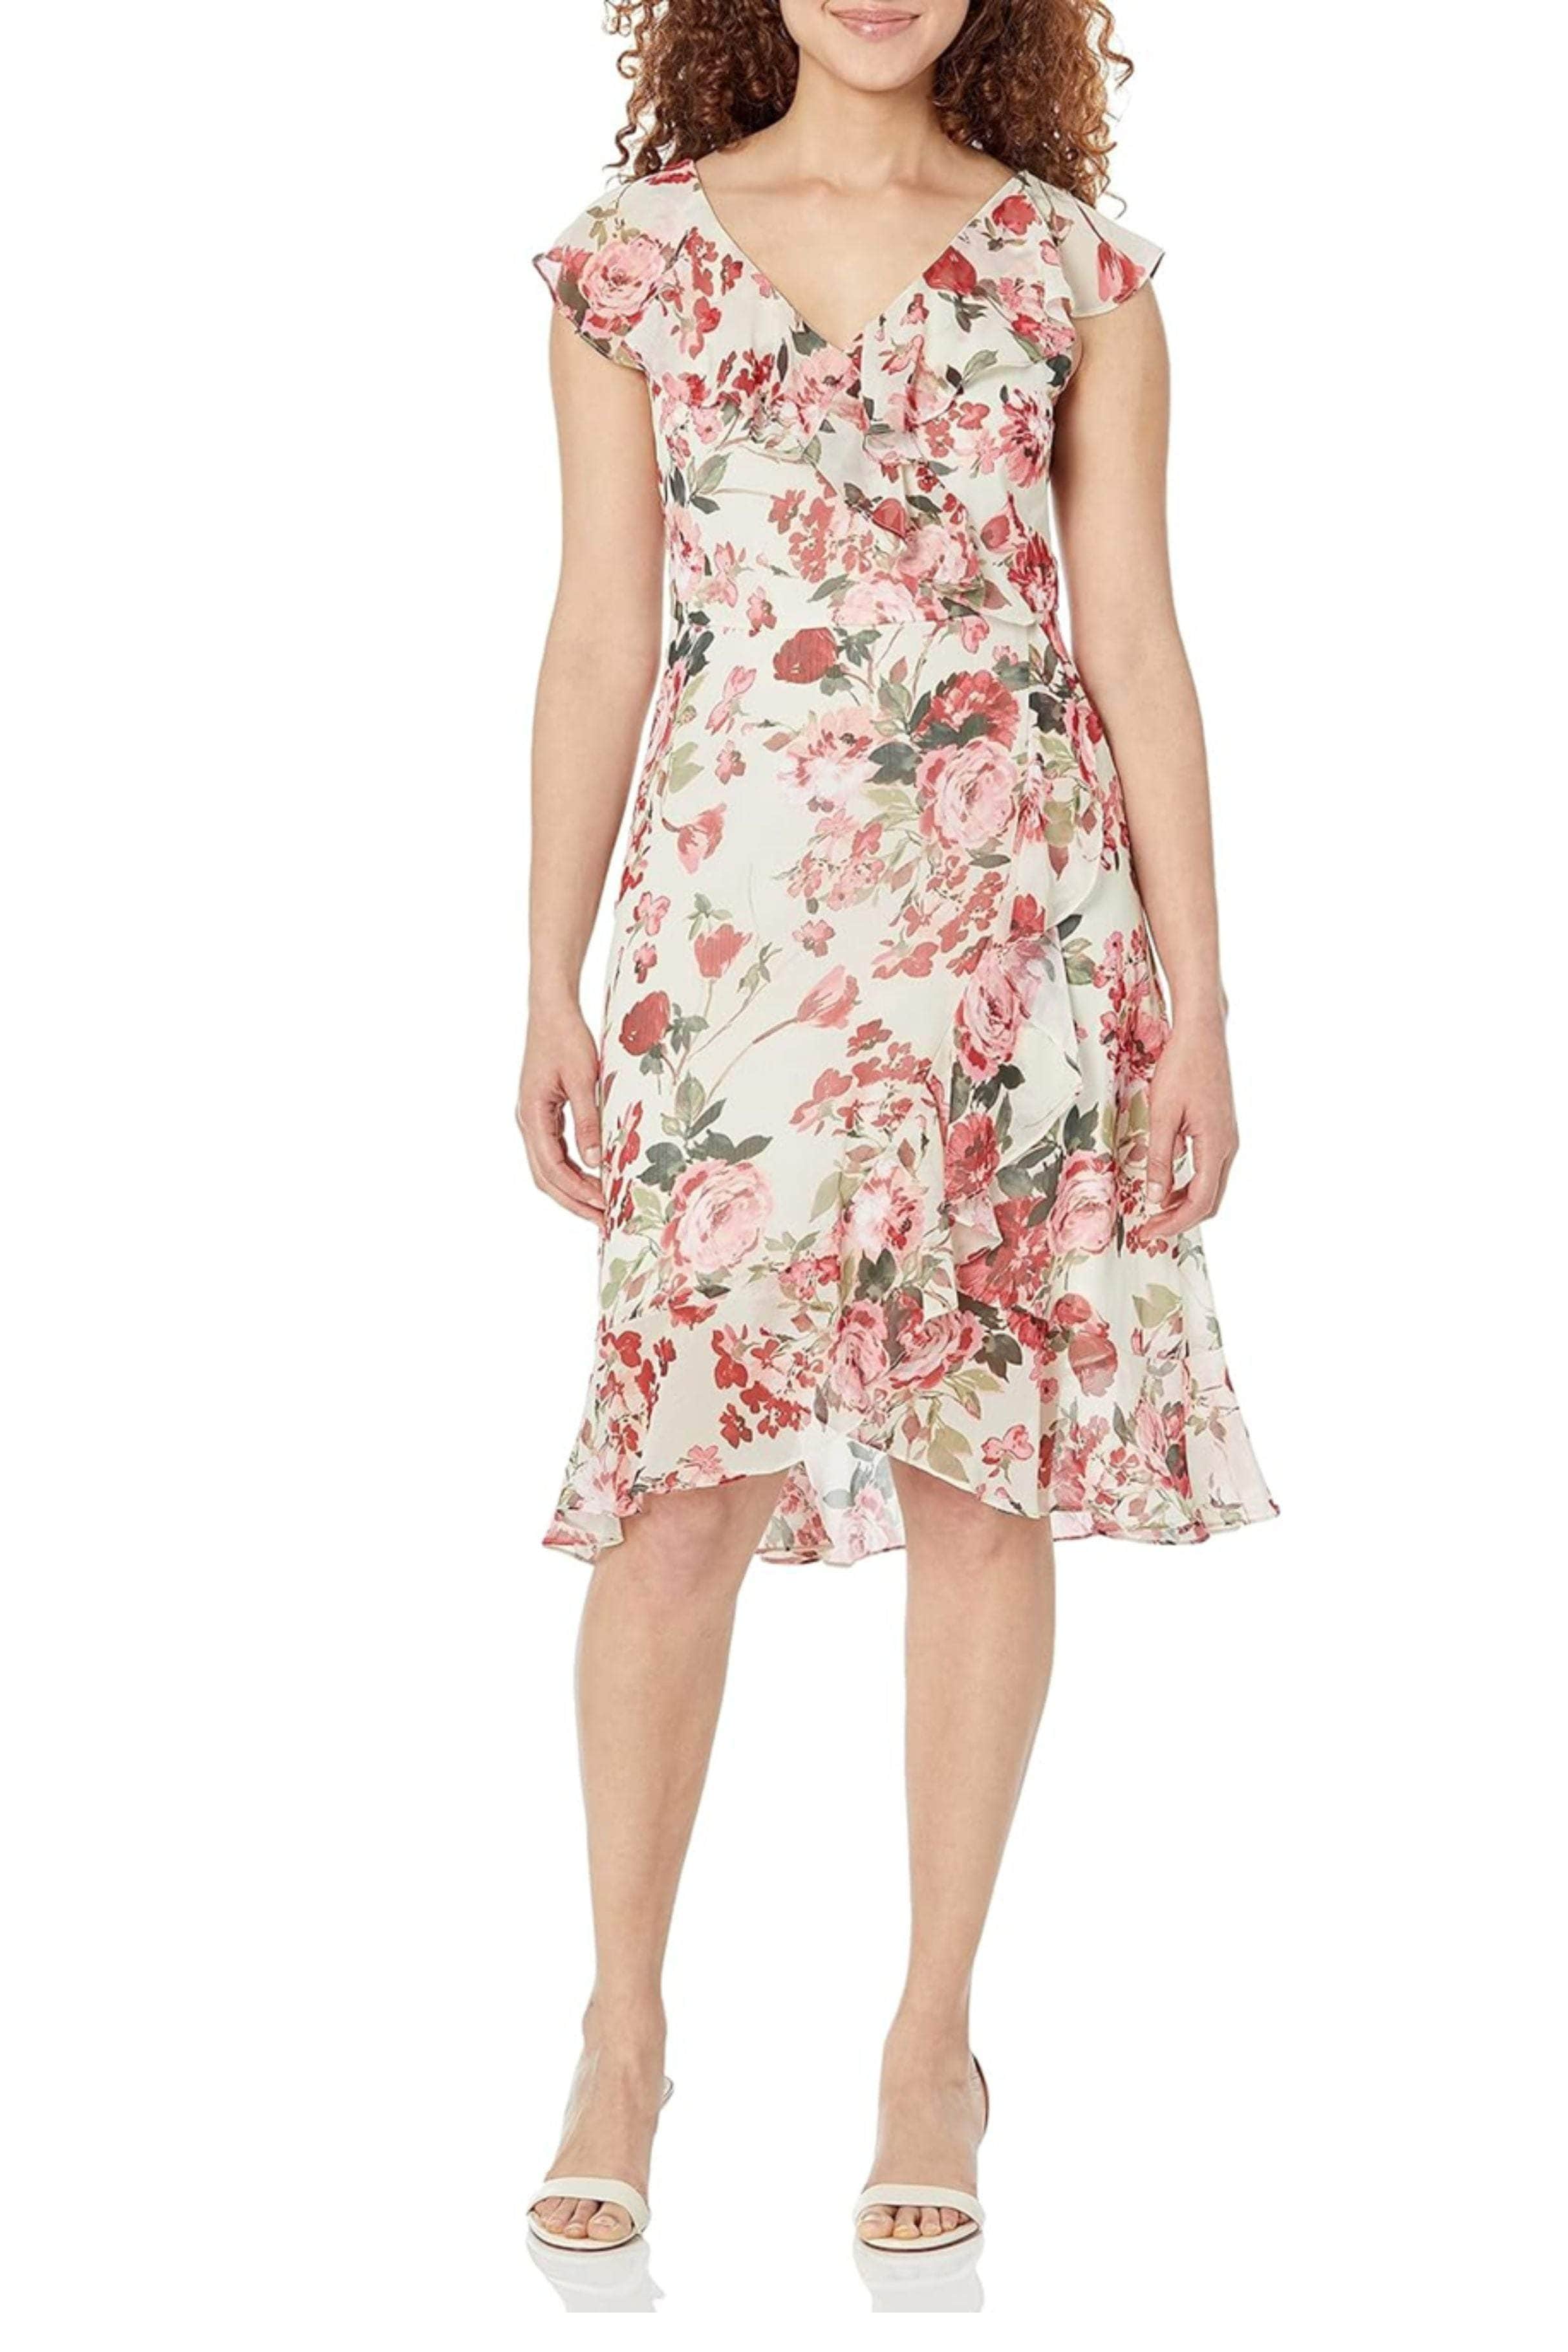 Image of London Times T6739M - Floral Sleeveless Cocktail Dress